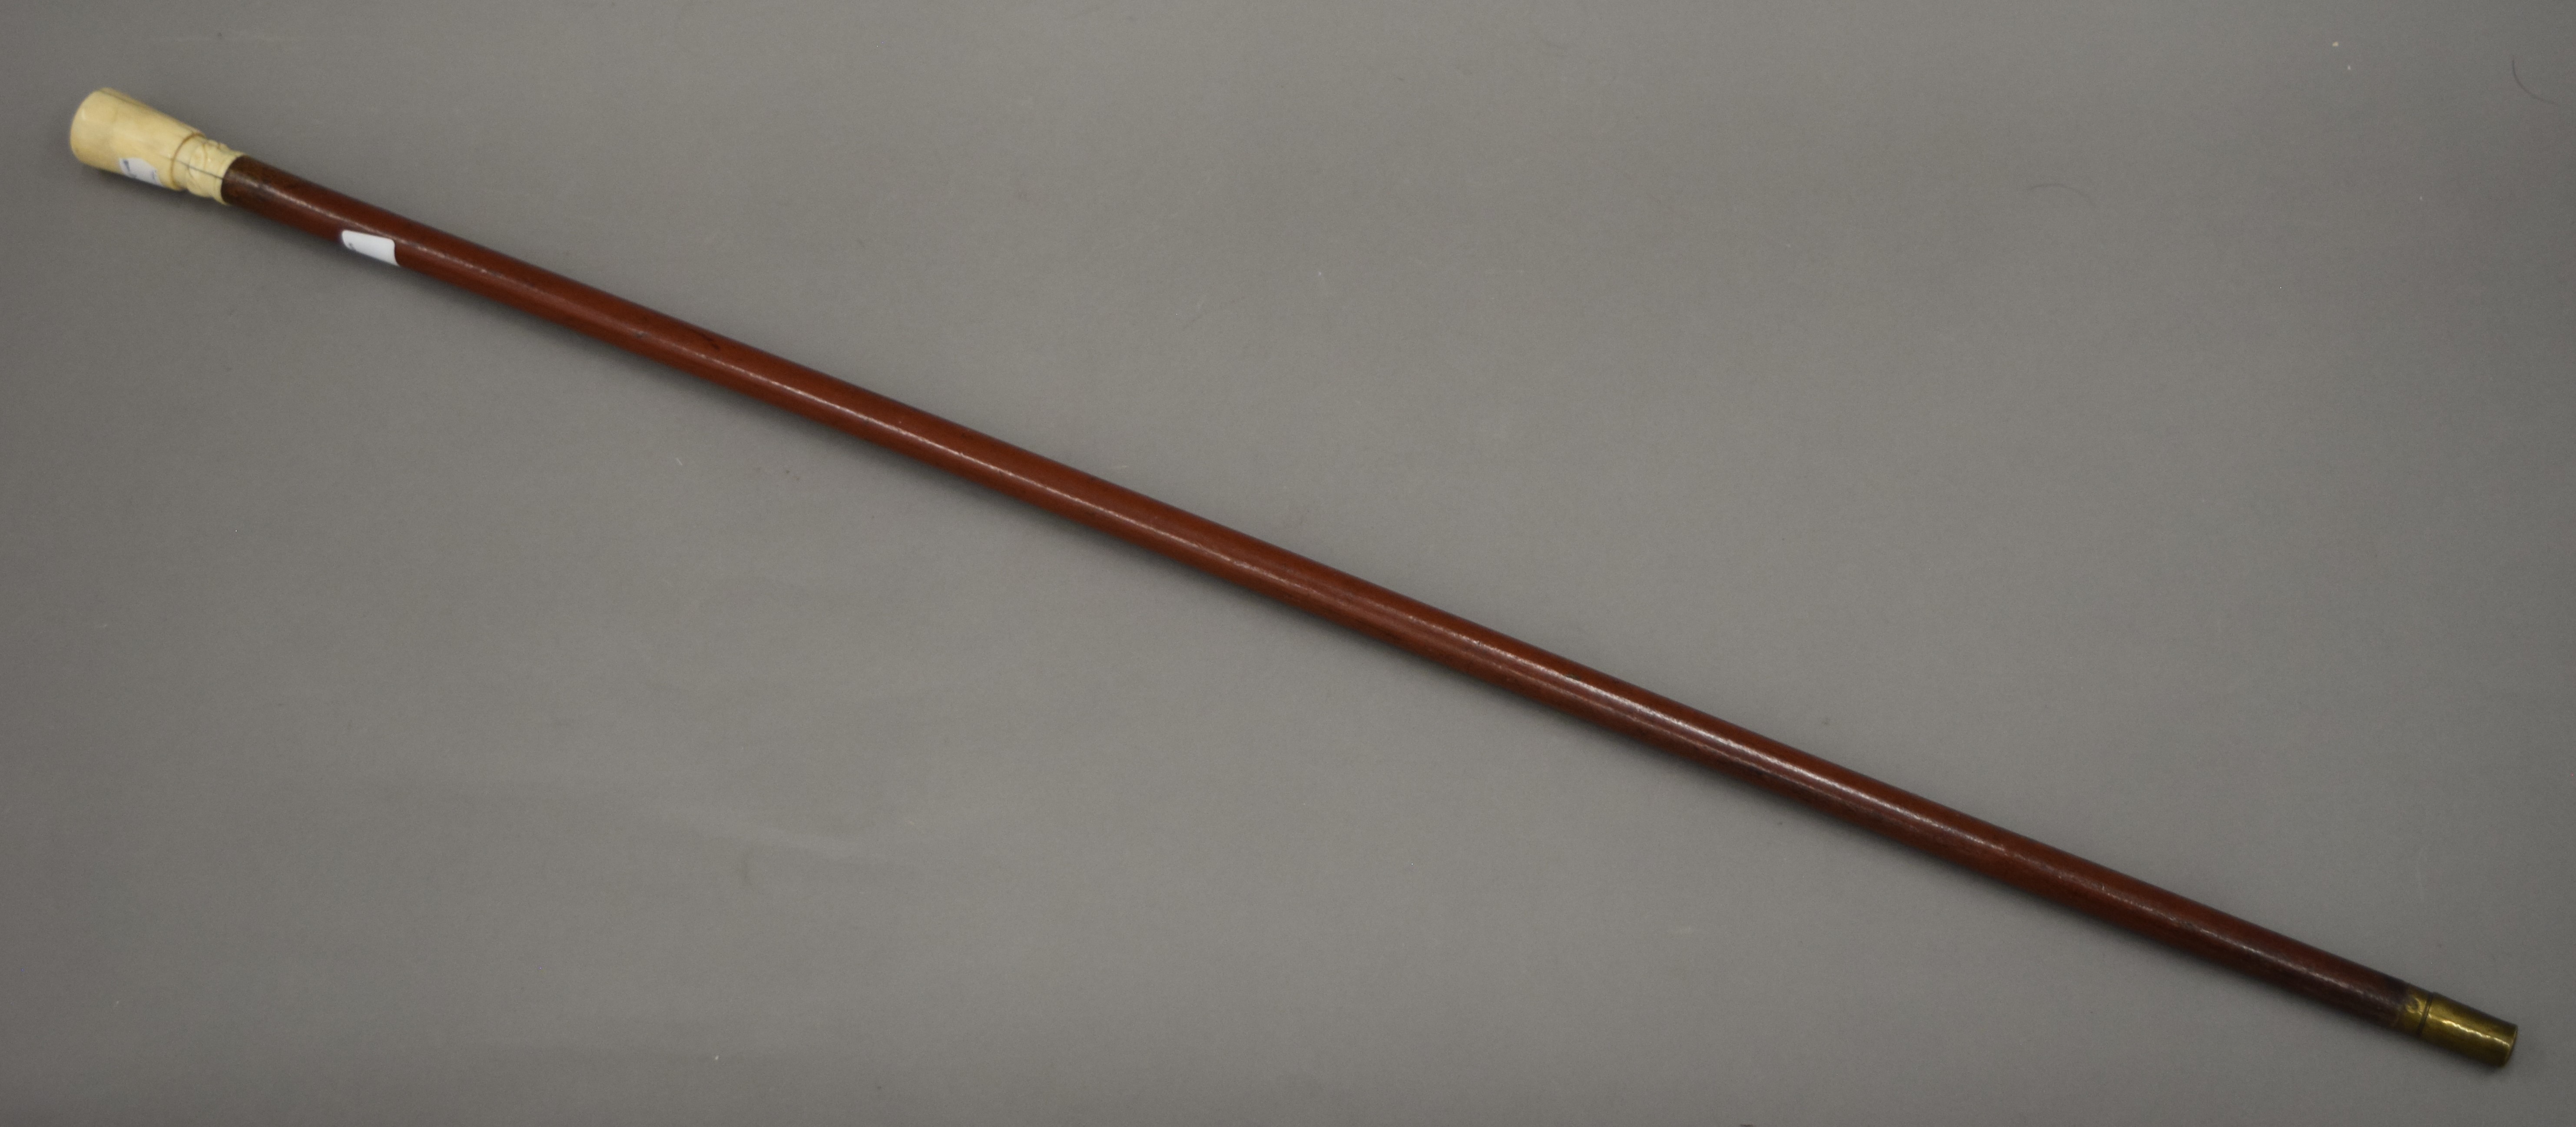 A Victorian ivory handled walking stick with detachable handle and ferrule, and hollow shaft. 88. - Image 3 of 3